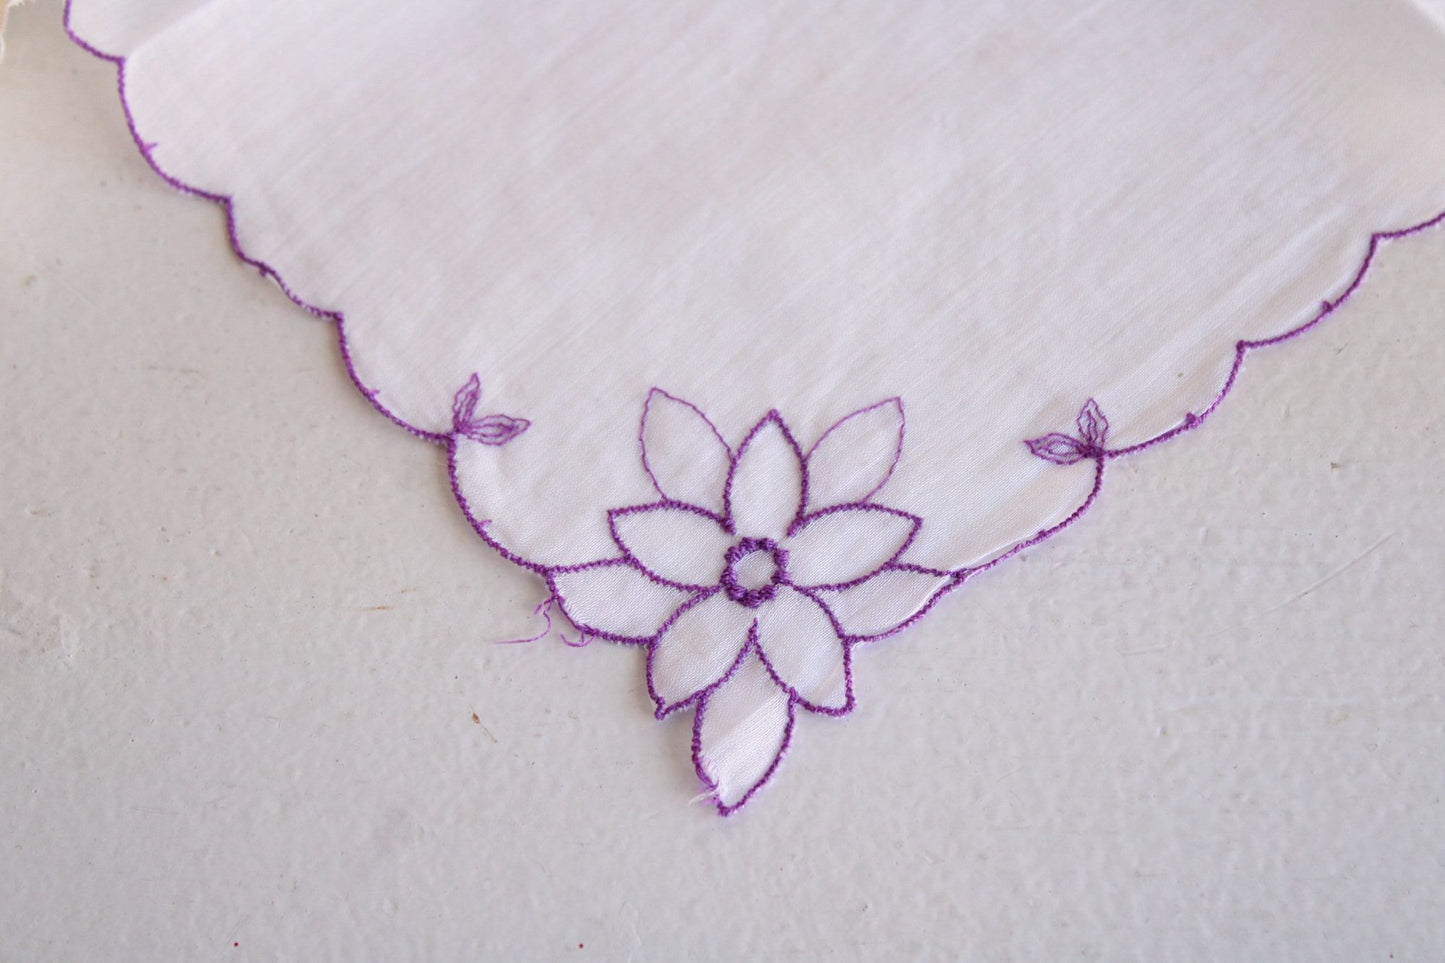 Vintage Purple Flower Embroidery on White Cotton Hanky